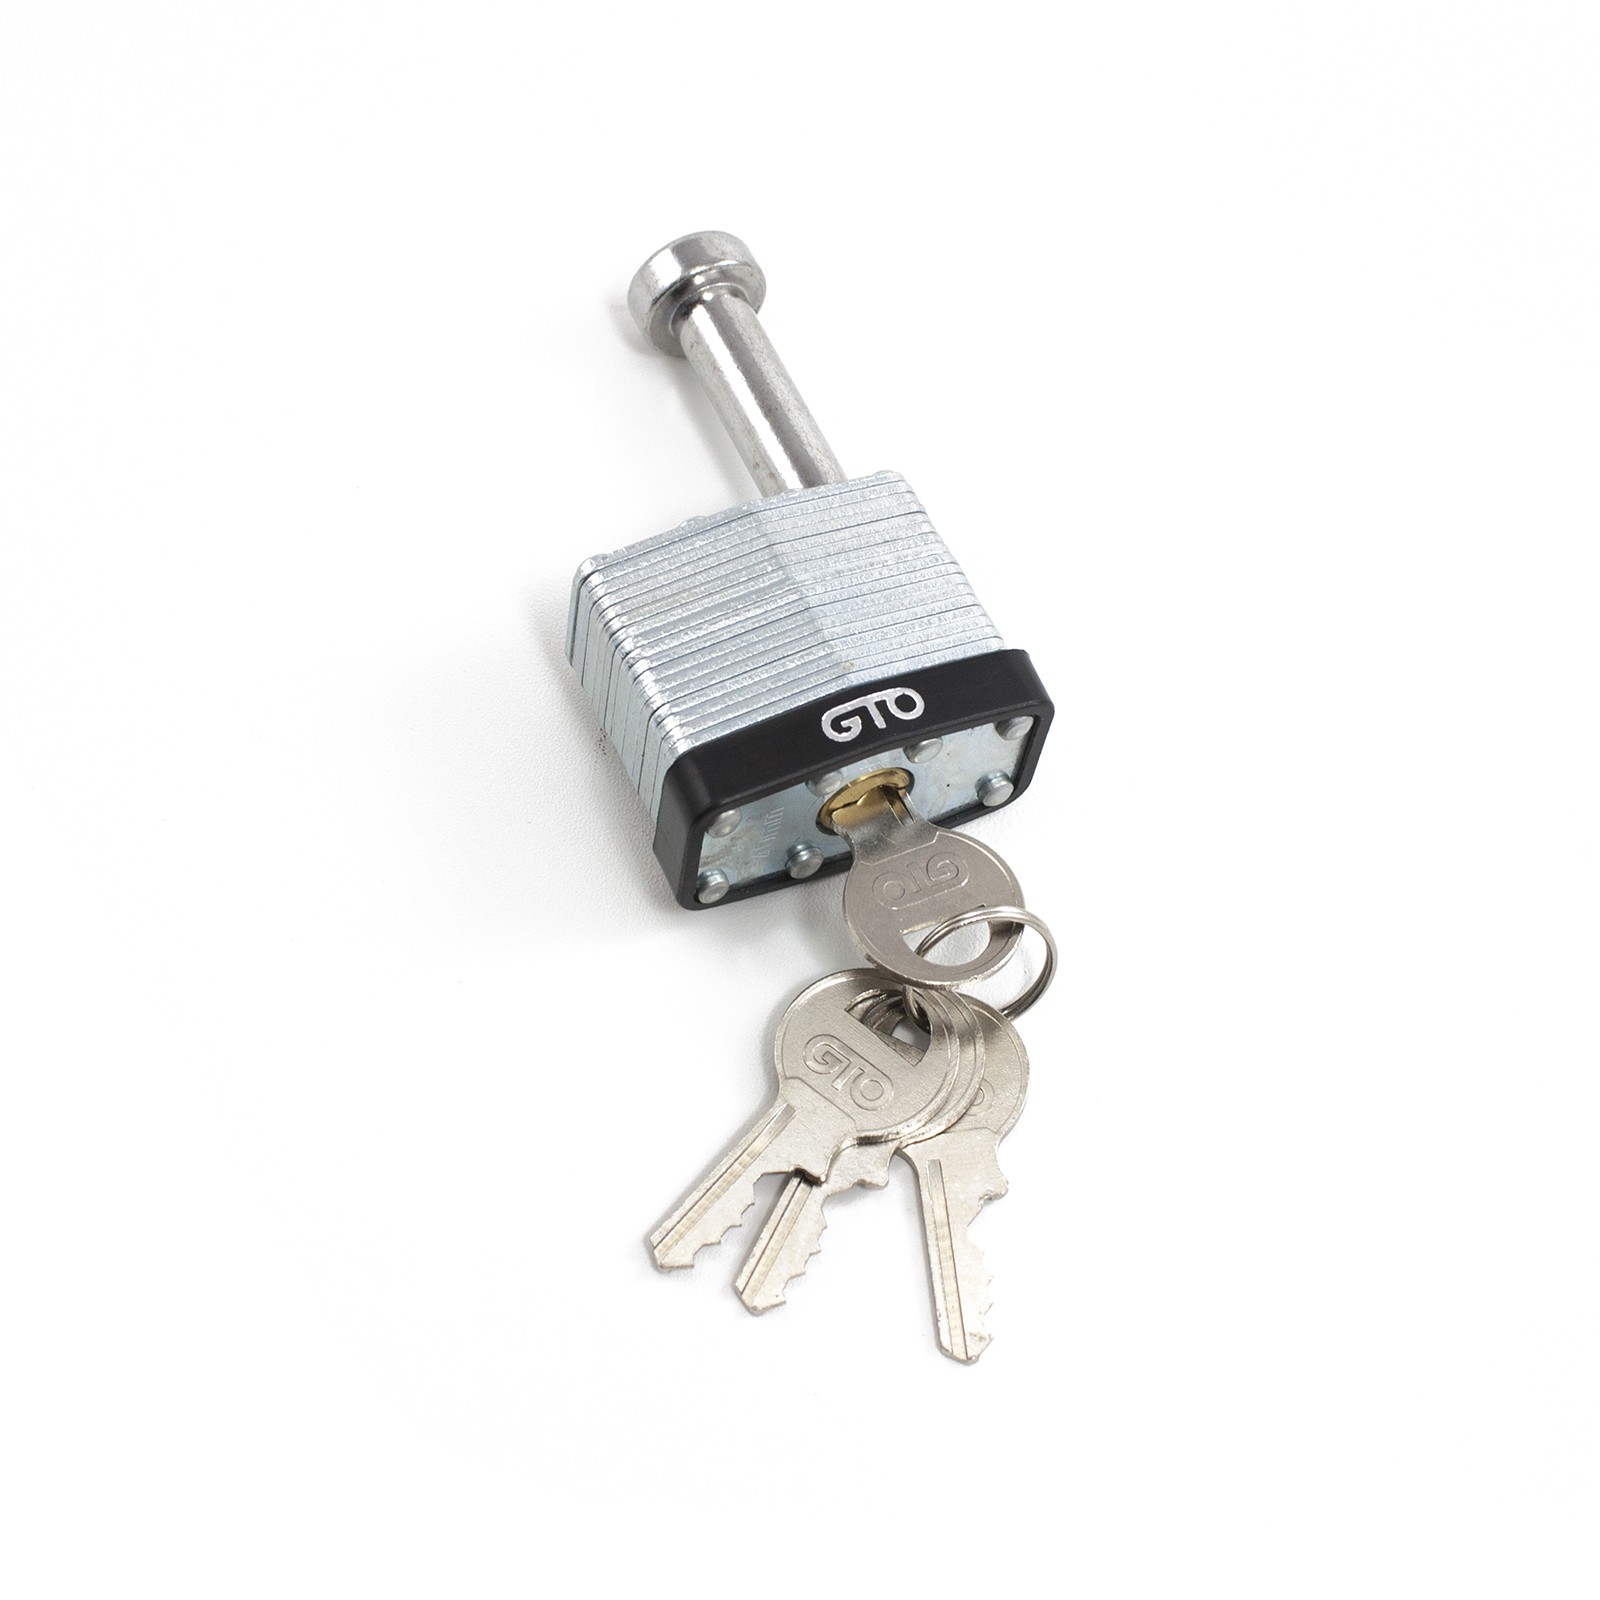 GTO/Linear Security Pin Locks, RB345 Keyed Alike - Packs of 10 only - RB345